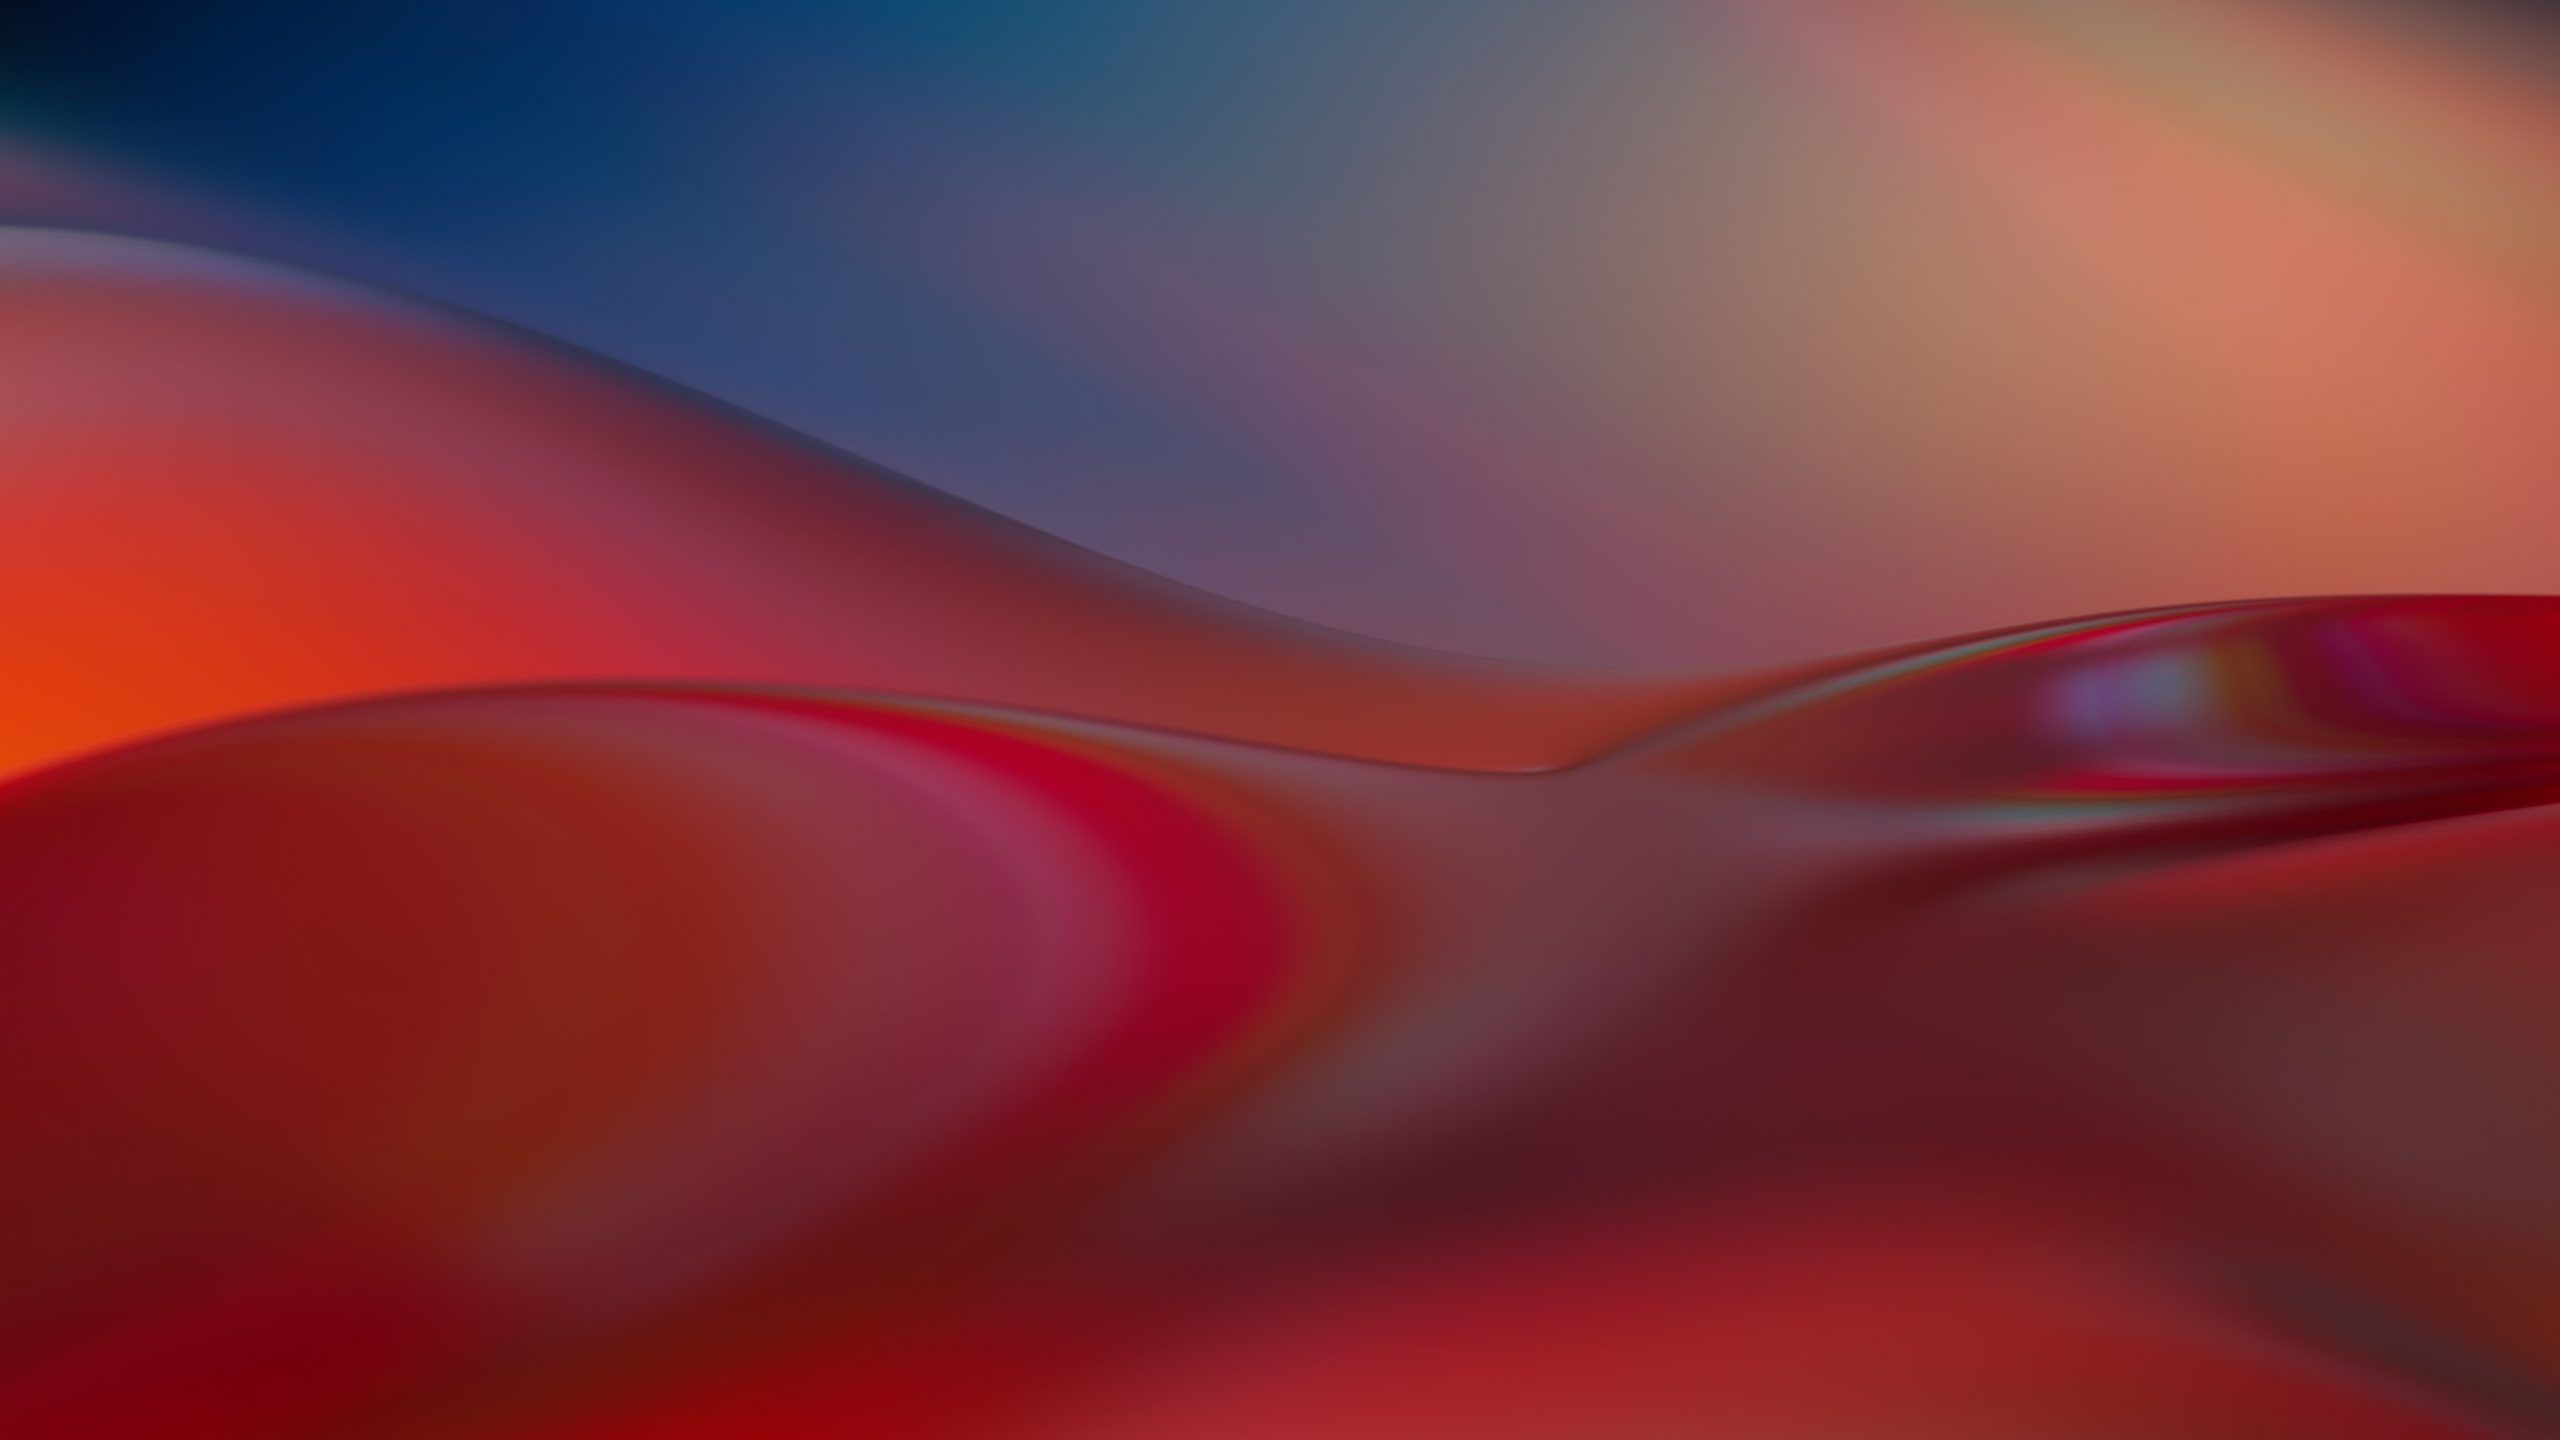 An abstract image of a wavy red and blue background - Windows 11